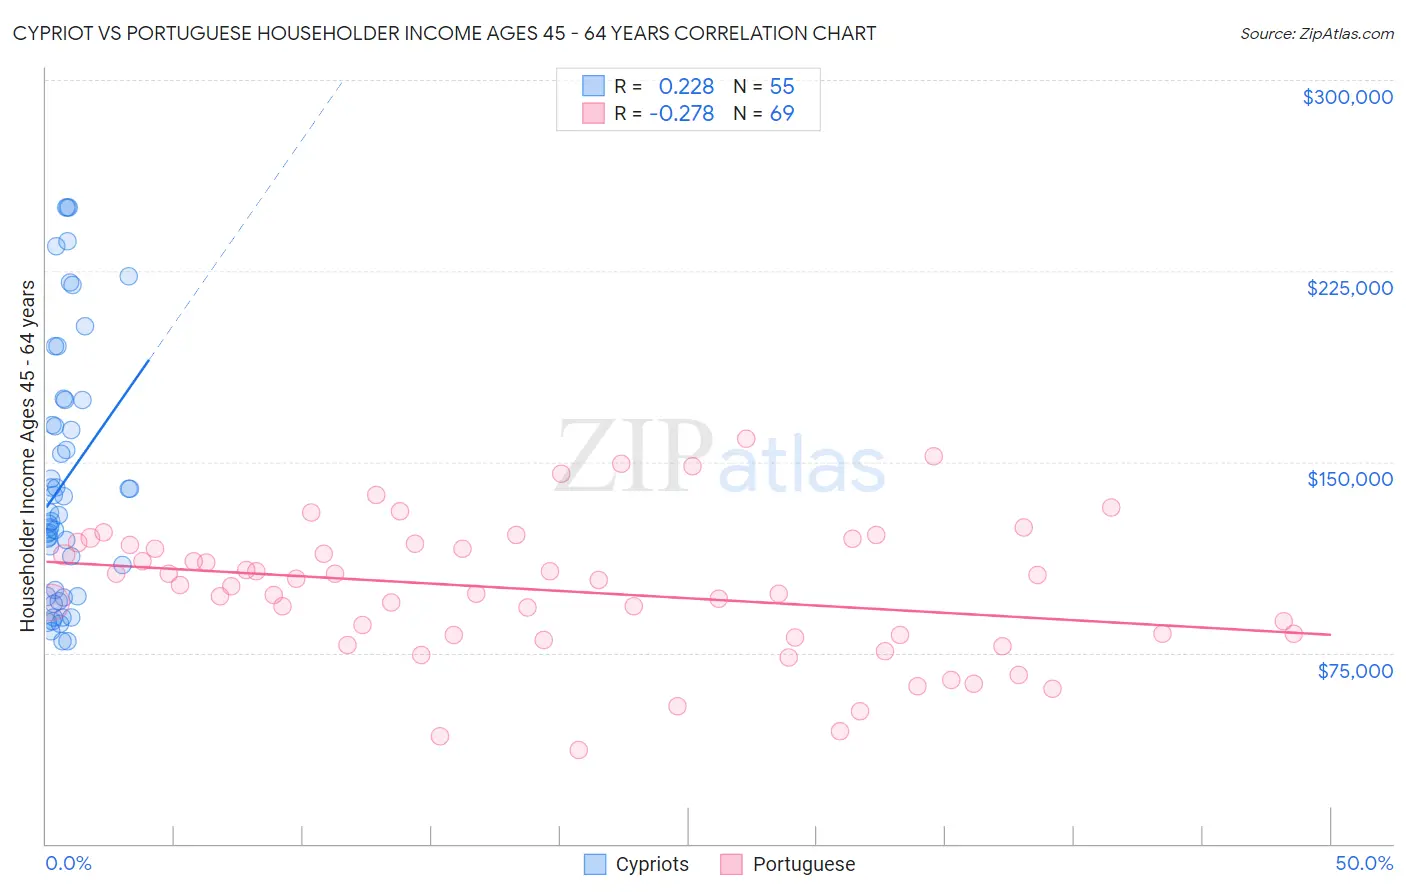 Cypriot vs Portuguese Householder Income Ages 45 - 64 years